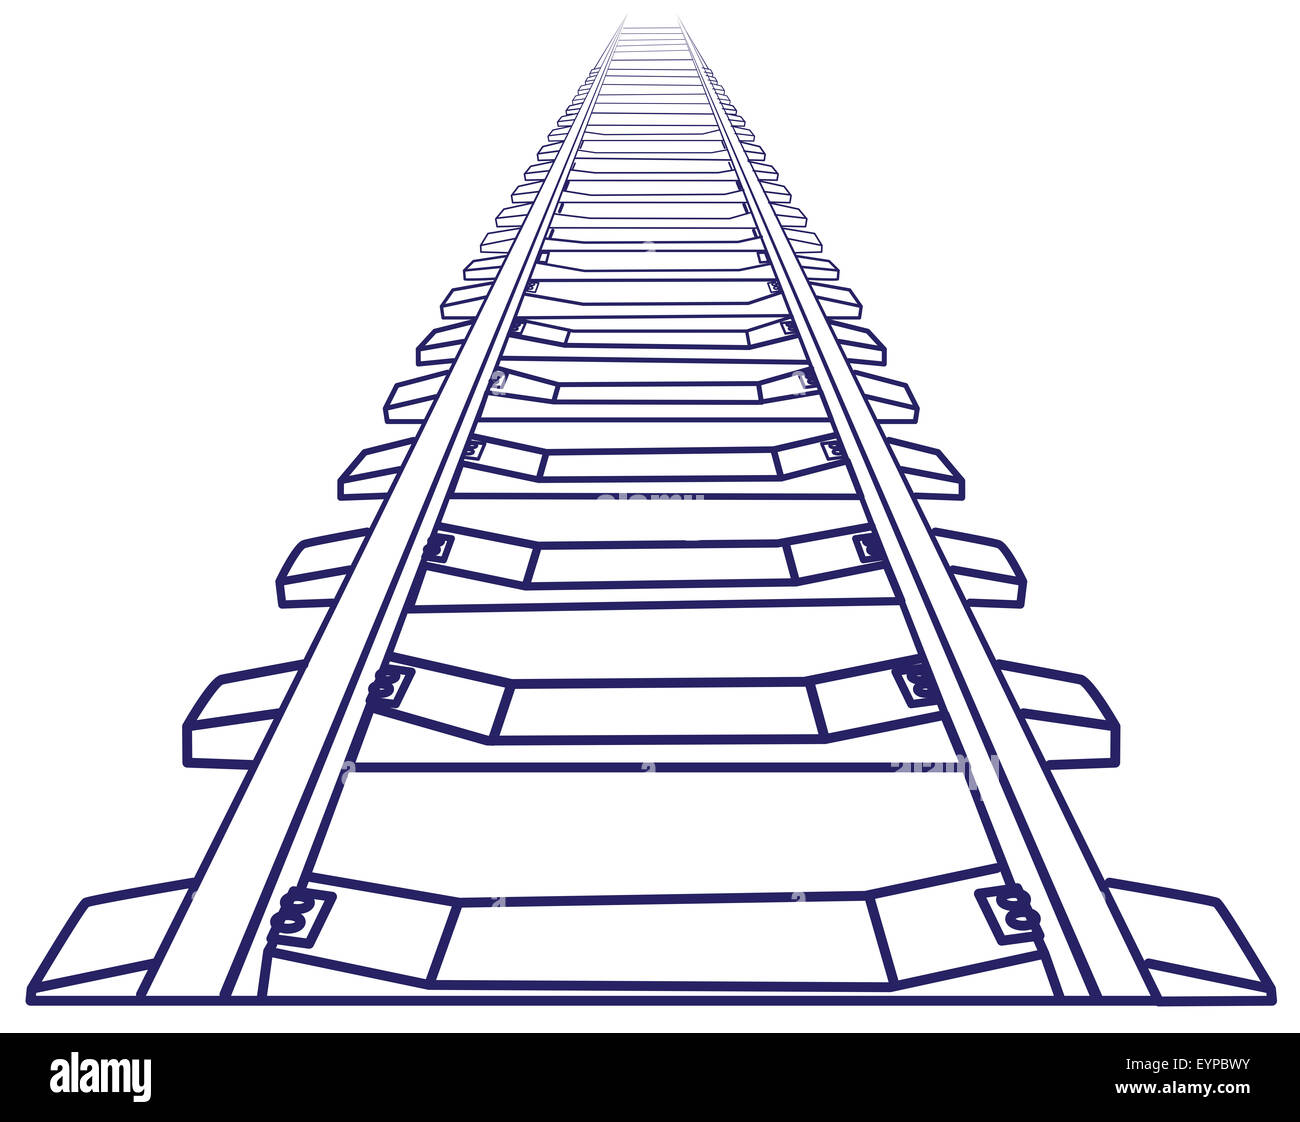 8,342 Railway Tracks Drawing Images, Stock Photos, 3D objects, & Vectors |  Shutterstock